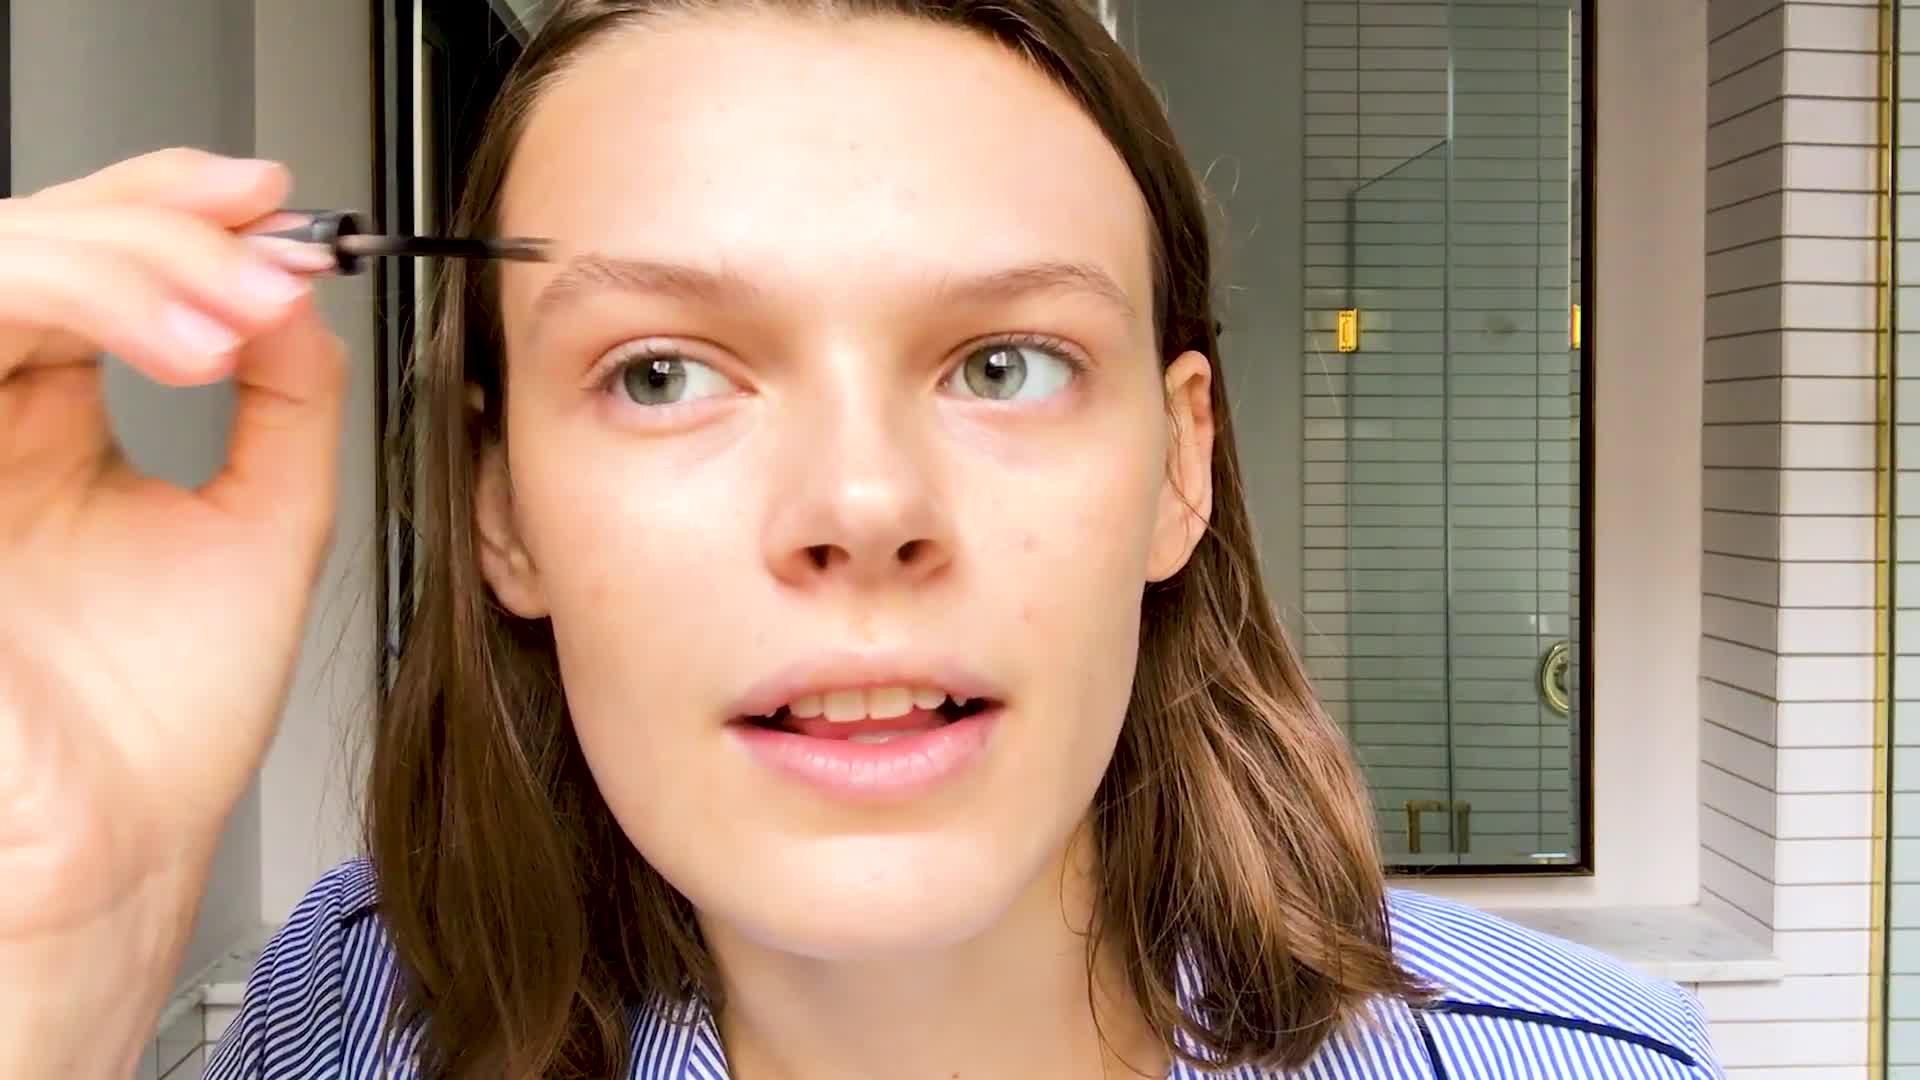 Watch Cara Taylor's Guide to Model Makeup—And Fighting Fashion